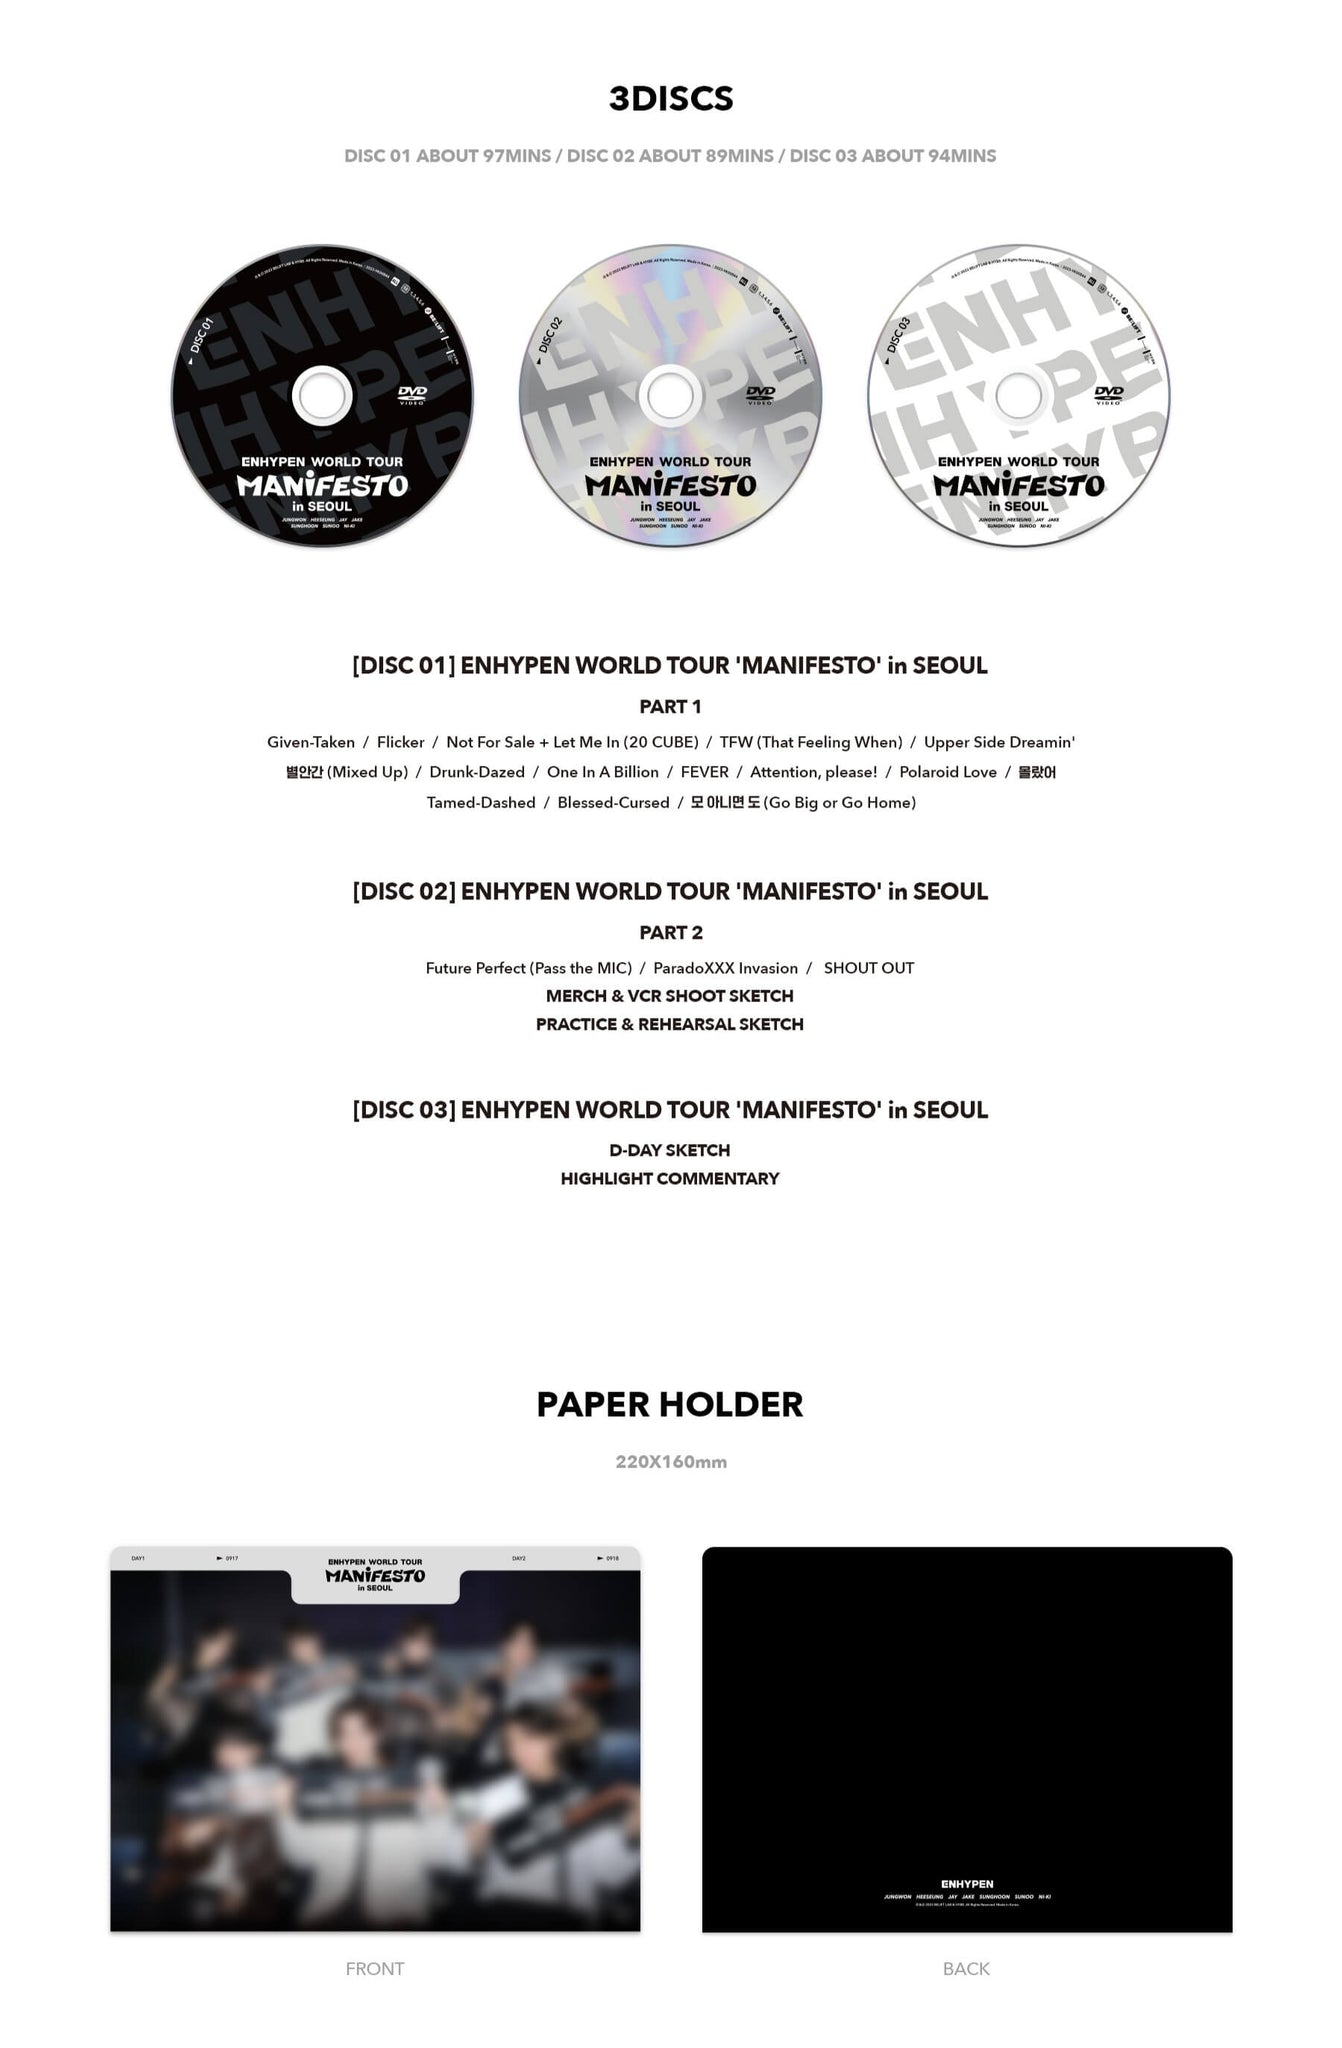 ENHYPEN WORLD TOUR MANIFESTO in SEOUL DVD Inclusions 3 Discs Paper Holder